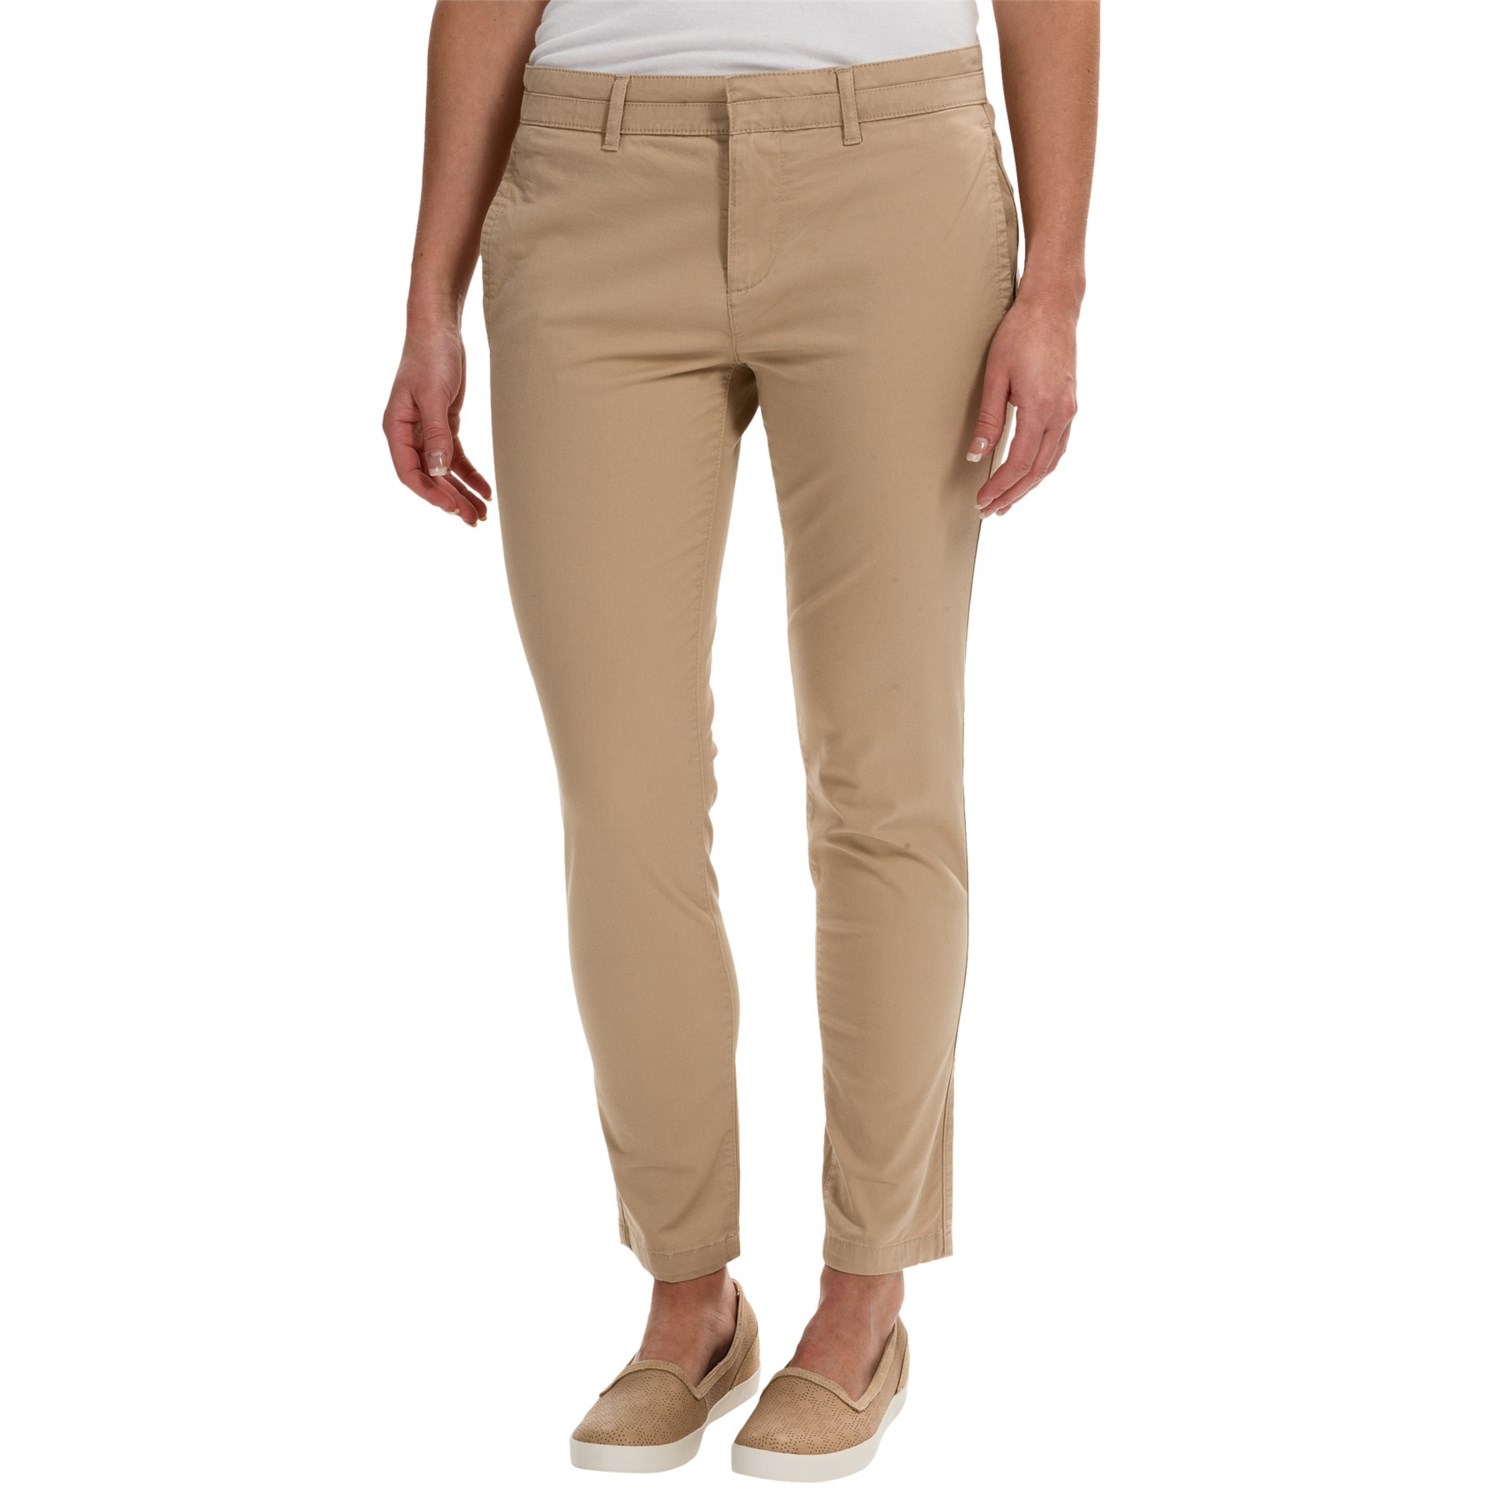 Timberland Broad Bay Chino Pants (For Women) 133WX - Save 69%